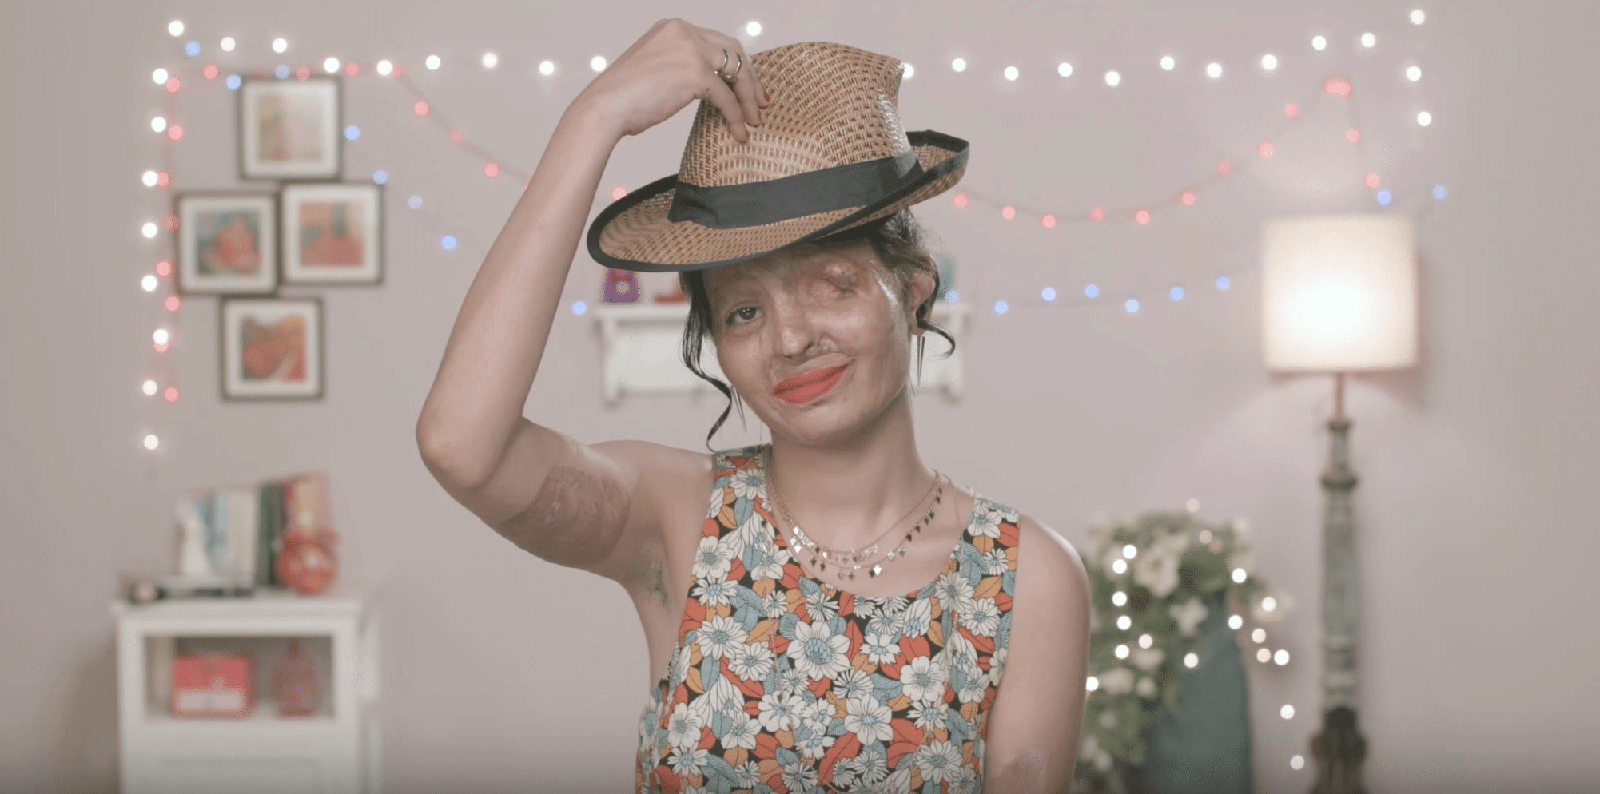 Acid attack survivor and advocate, Reshma Qureshi, offers an "if-all-else-fails" suggestion to cover up dark spots: wear a hat.